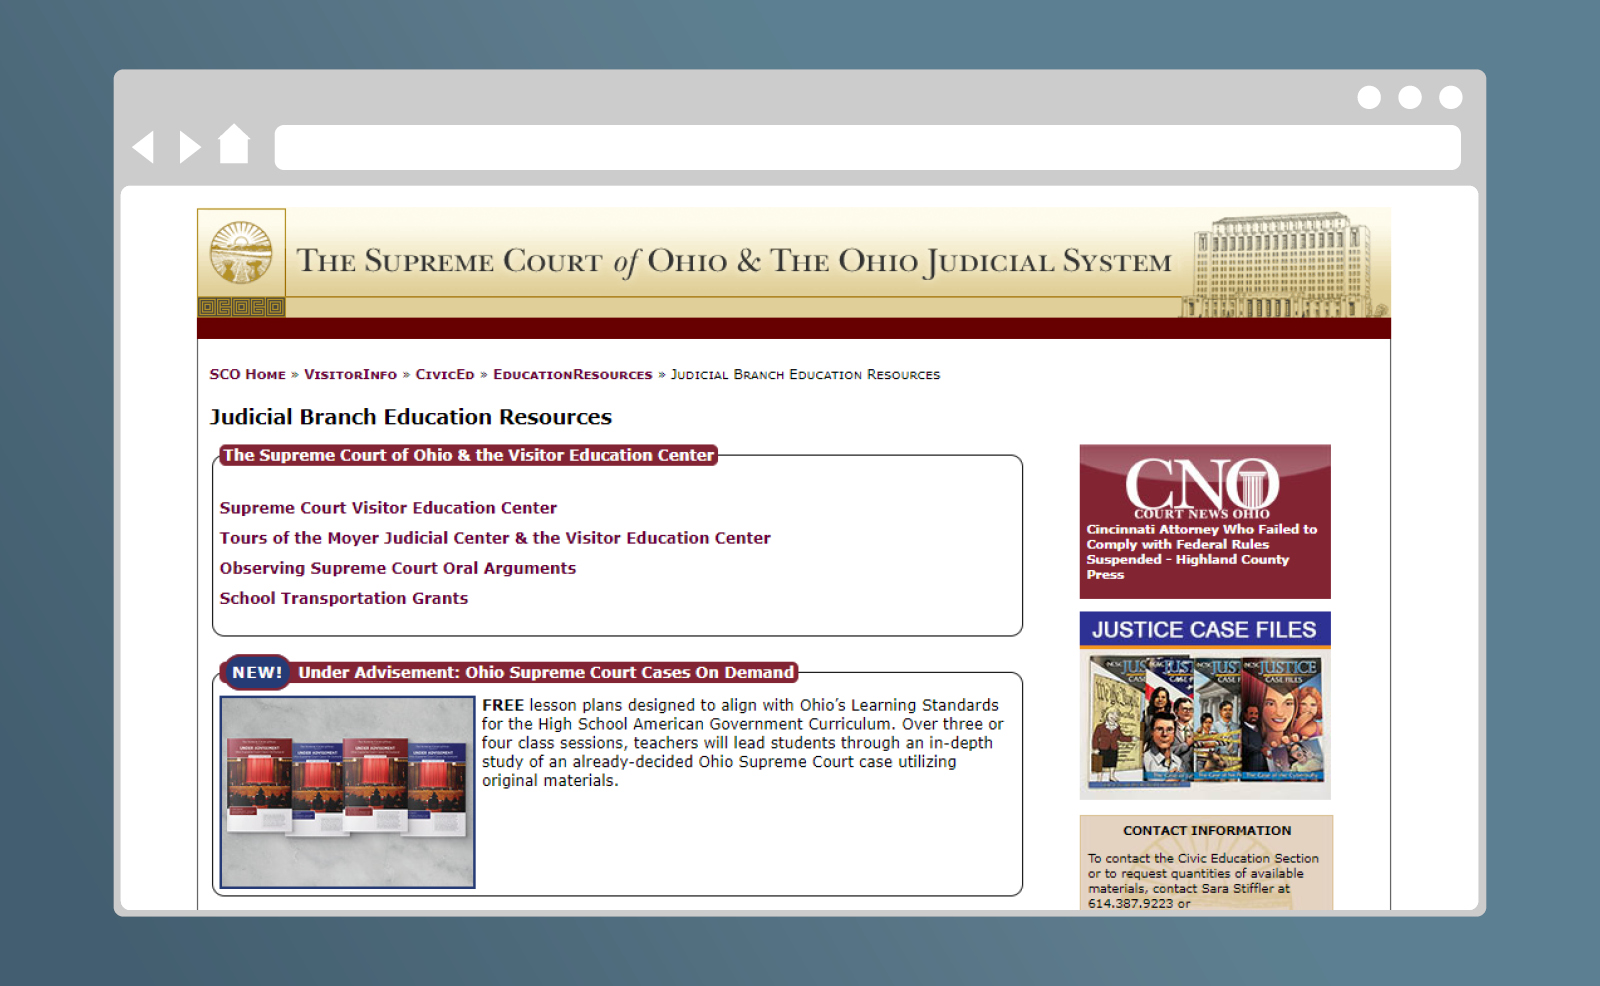 Image a screenshot of the Judicial Branch Education Resources page on the Ohio Supreme Court website